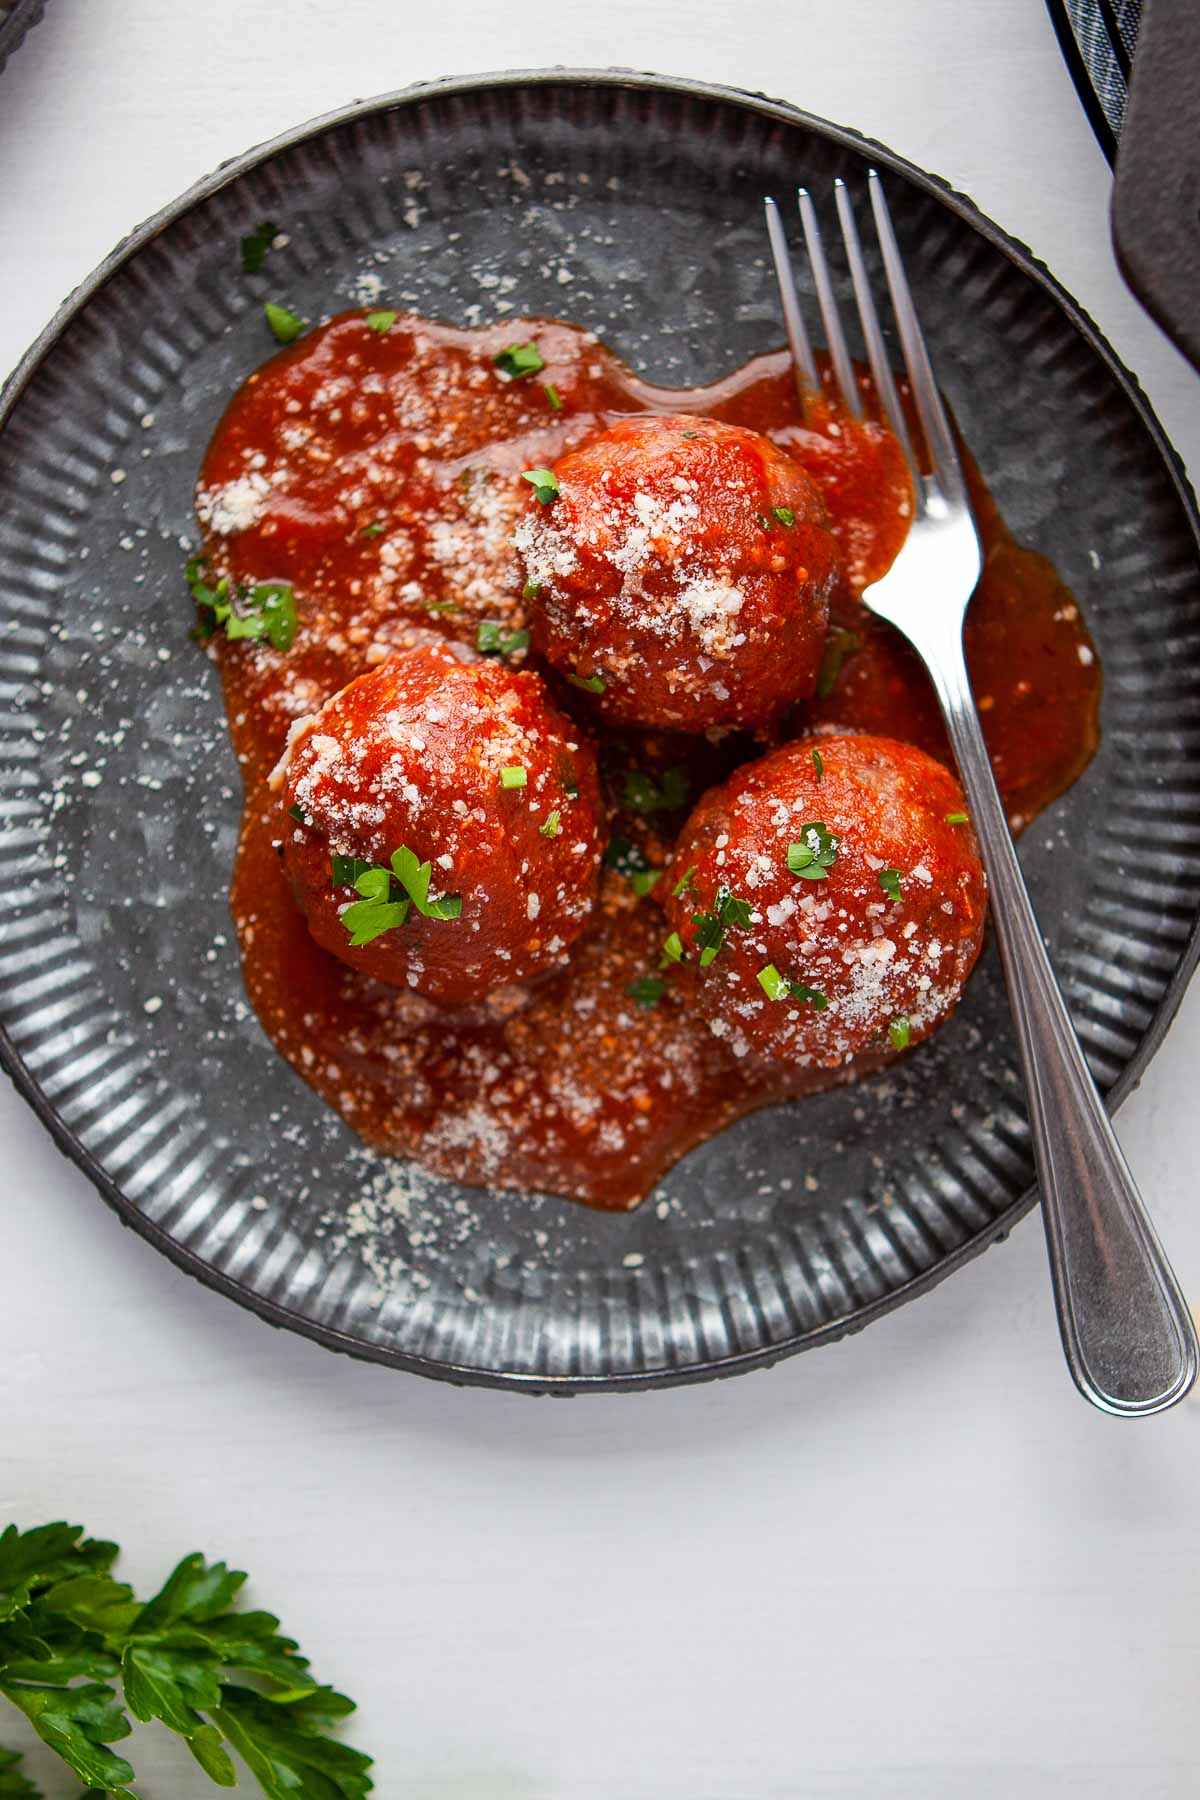 homemade meatballs with chipotle sauce on plate close up